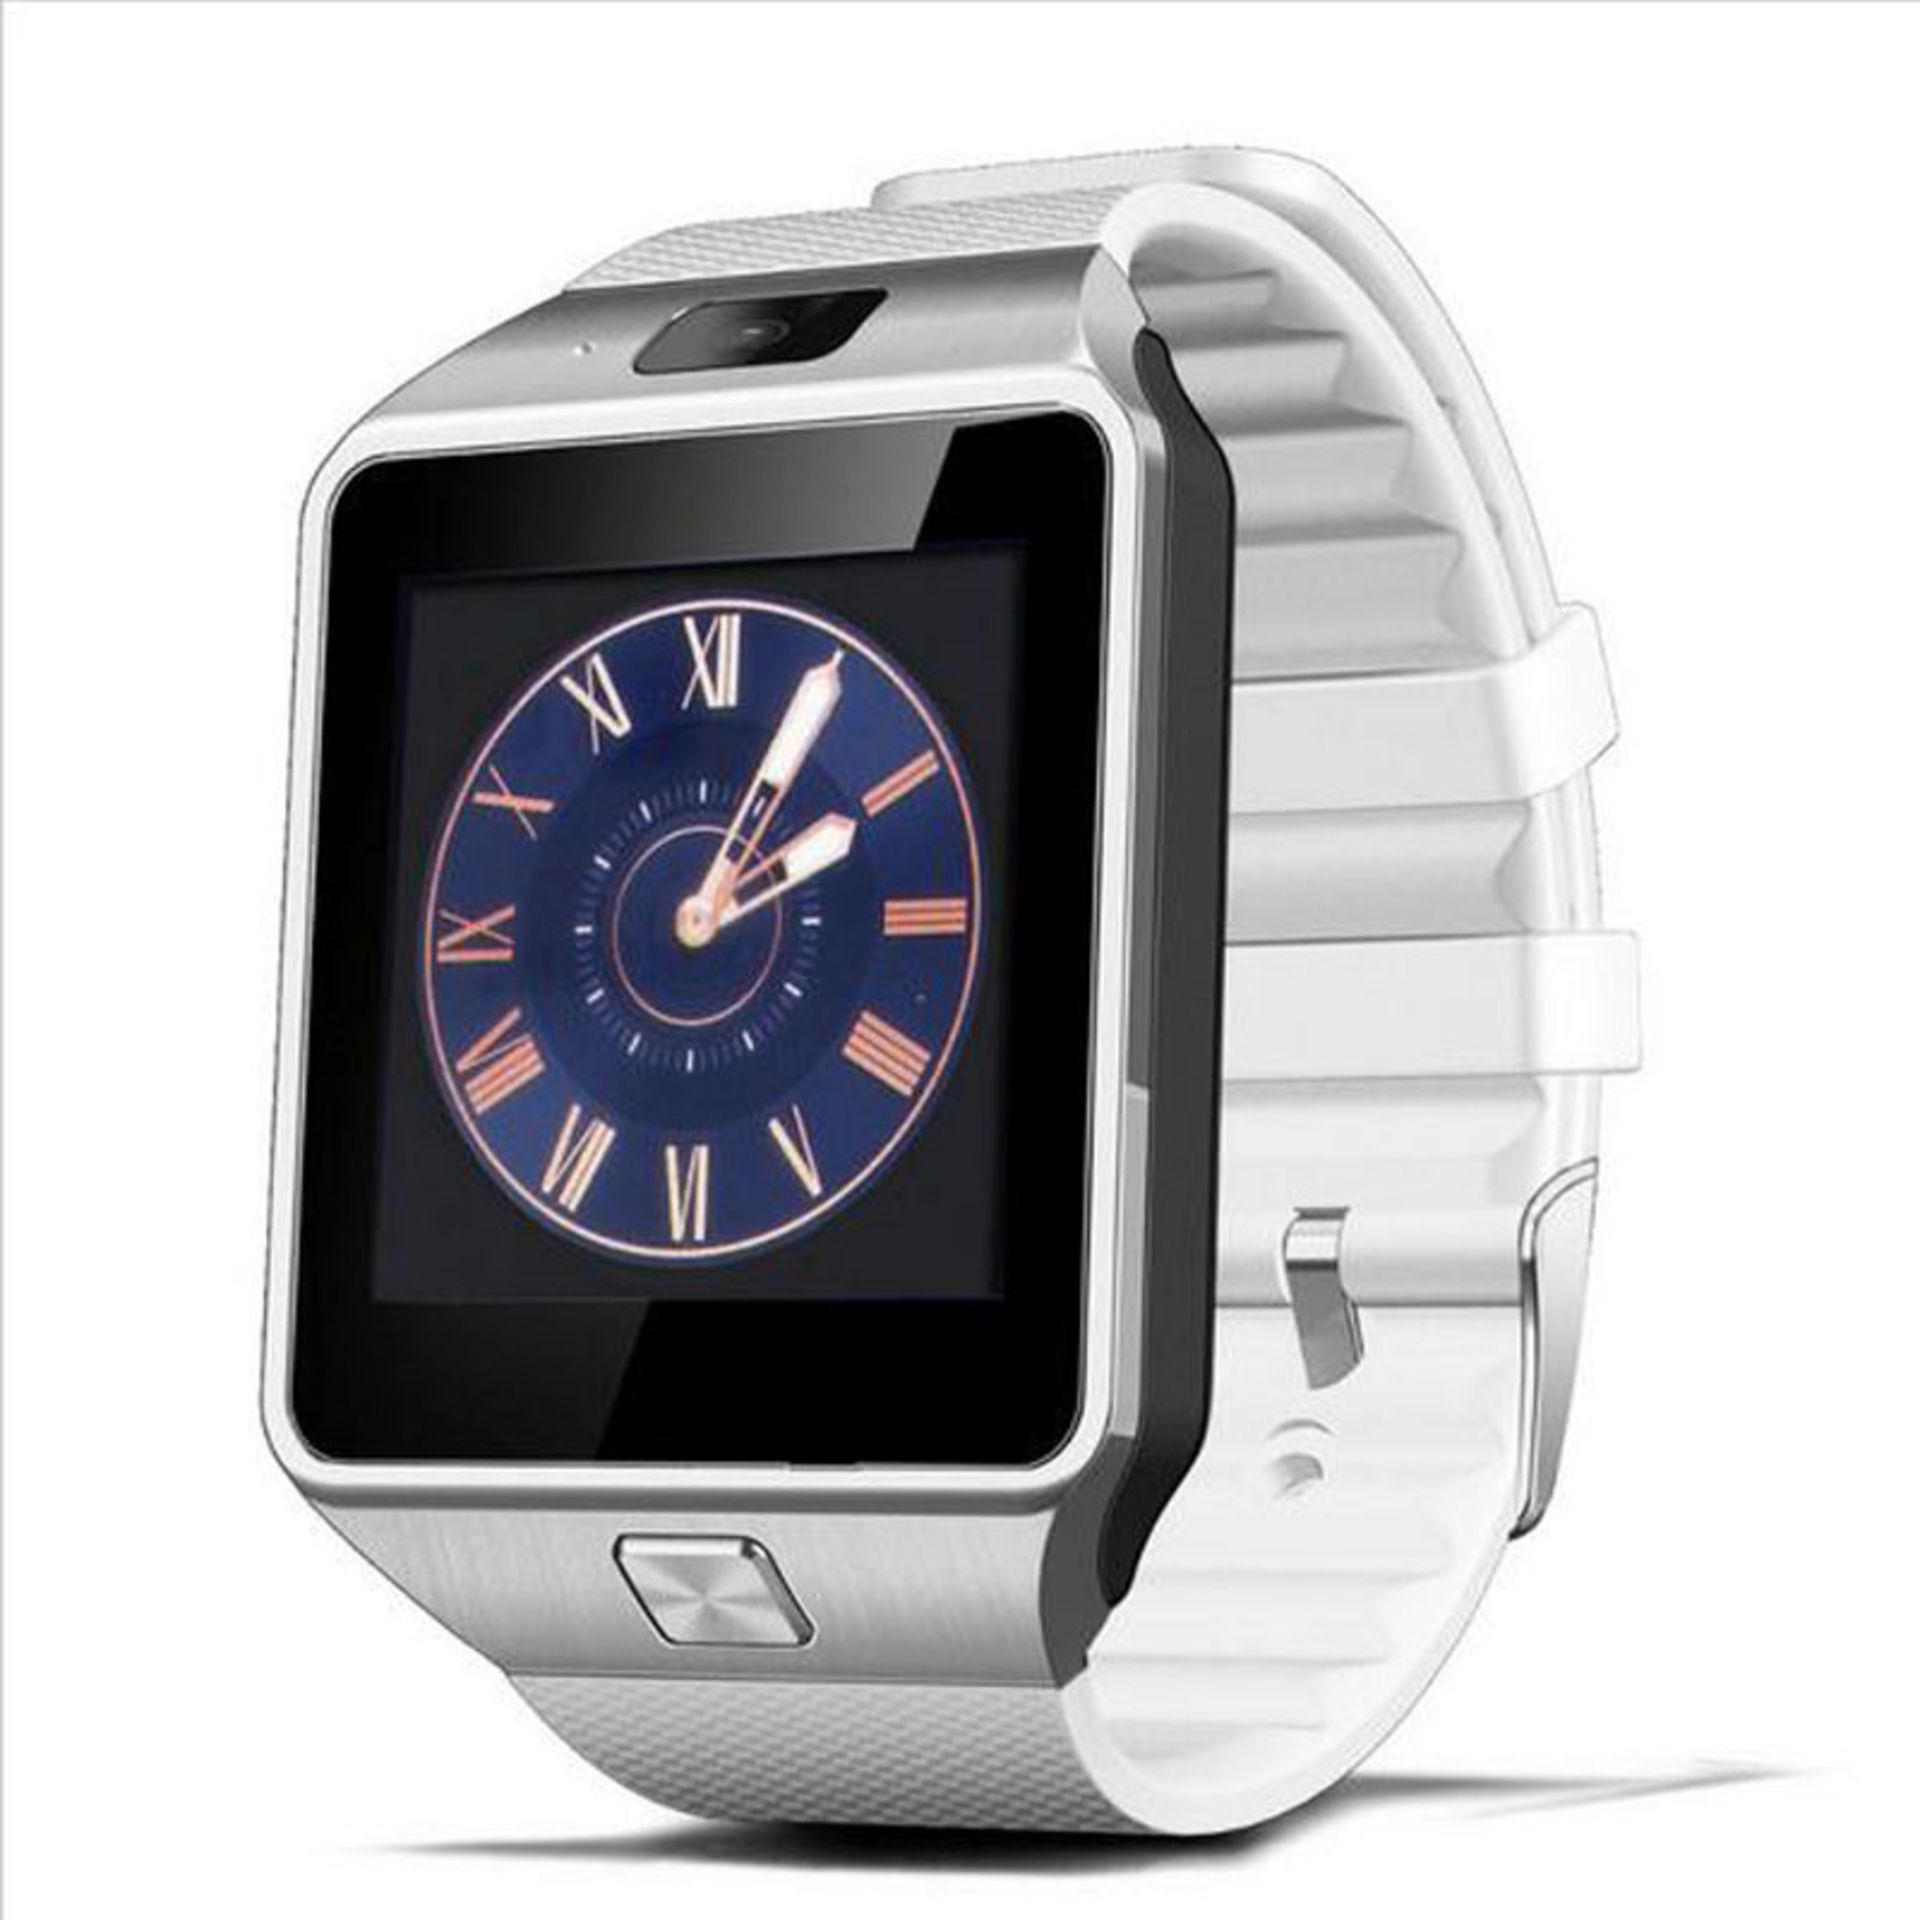 ONE BOXED BRAND NEW SMART WATCH WITH CAMERA FUNCTION, COMPATIBLE WITH I PHONE AND ANDROID IN